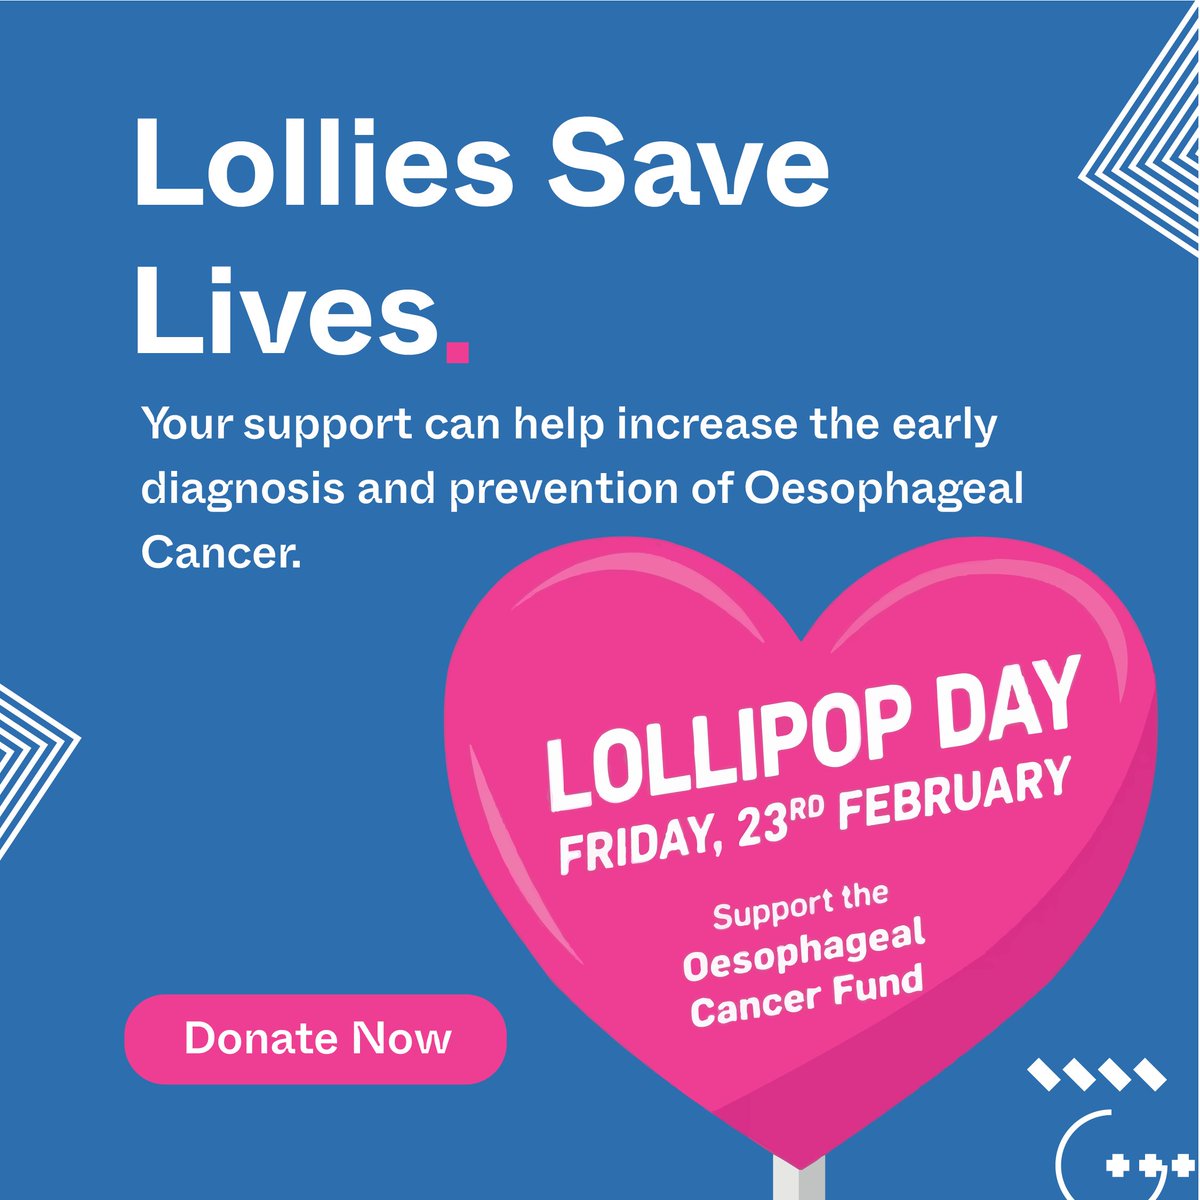 Today is #LollipopDay24, Please support the @OesophagealCF .Donate today via the website ocf.ie to raise awareness and save lives. Text LOLLY to 50300 to donate €4 #Fightingcancer #CancerResearch #OCFbyyourside #idonate #idonate_ie